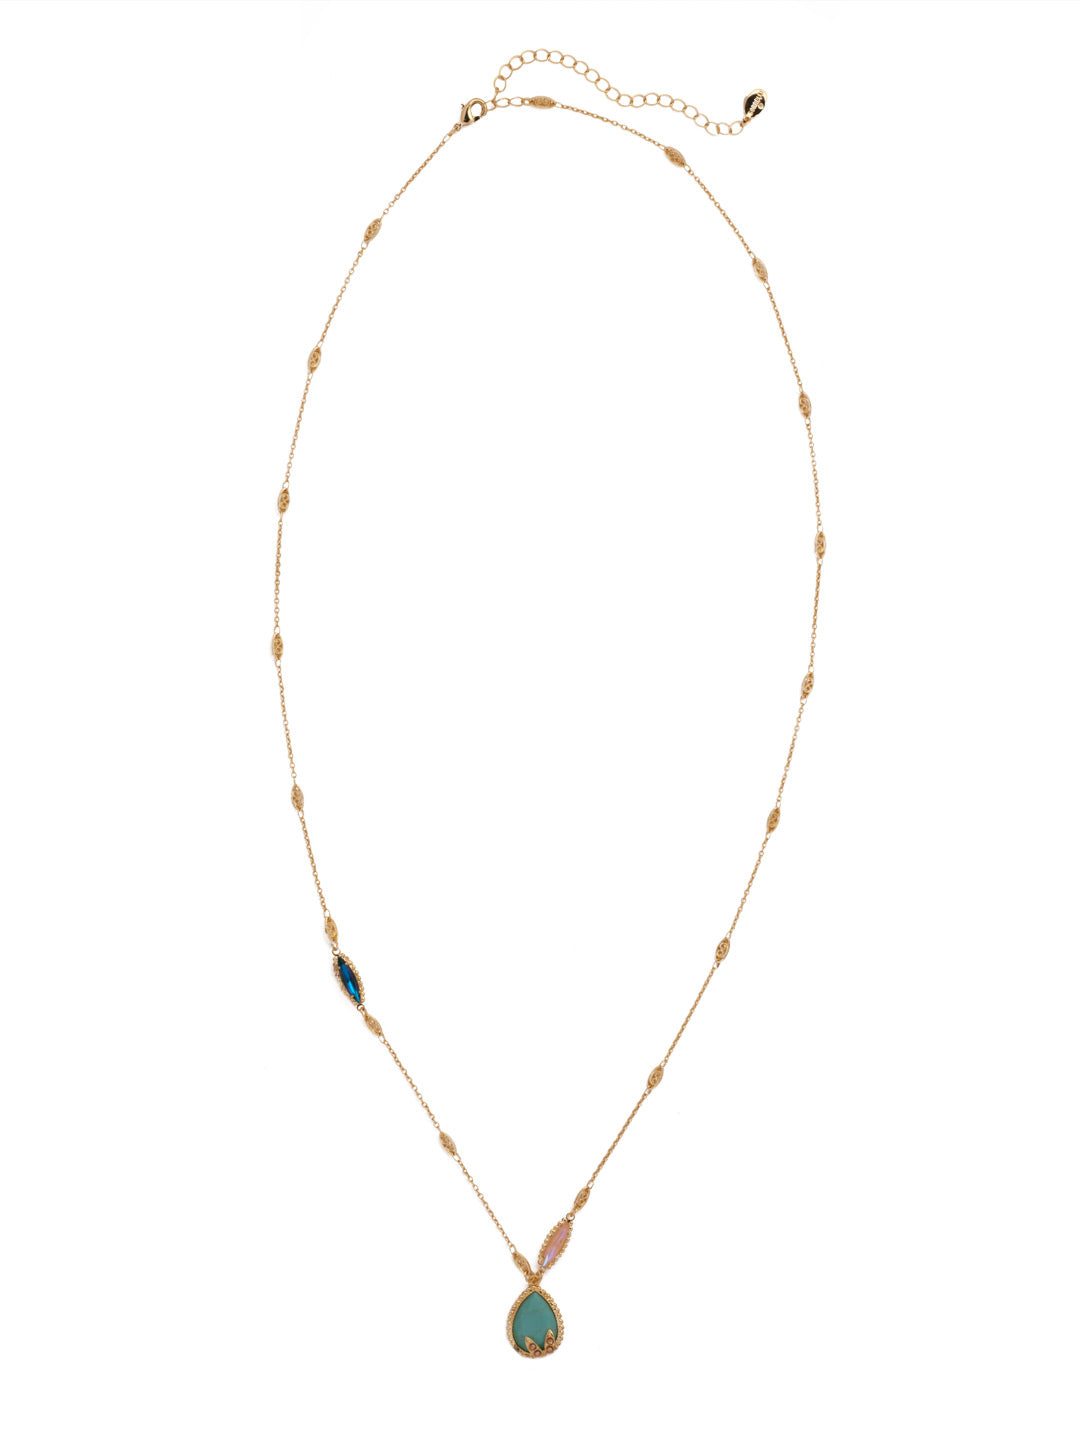 Sandy Embellished Long Necklace - NEZ16BGSOP - <p>The Sandy Embellished Long Necklace features a bold teardrop stone, held in place by decorative prongs, and sits predominately at the base of a delicate chain that is embellished with two crystals. From Sorrelli's South Pacific collection in our Bright Gold-tone finish.</p>